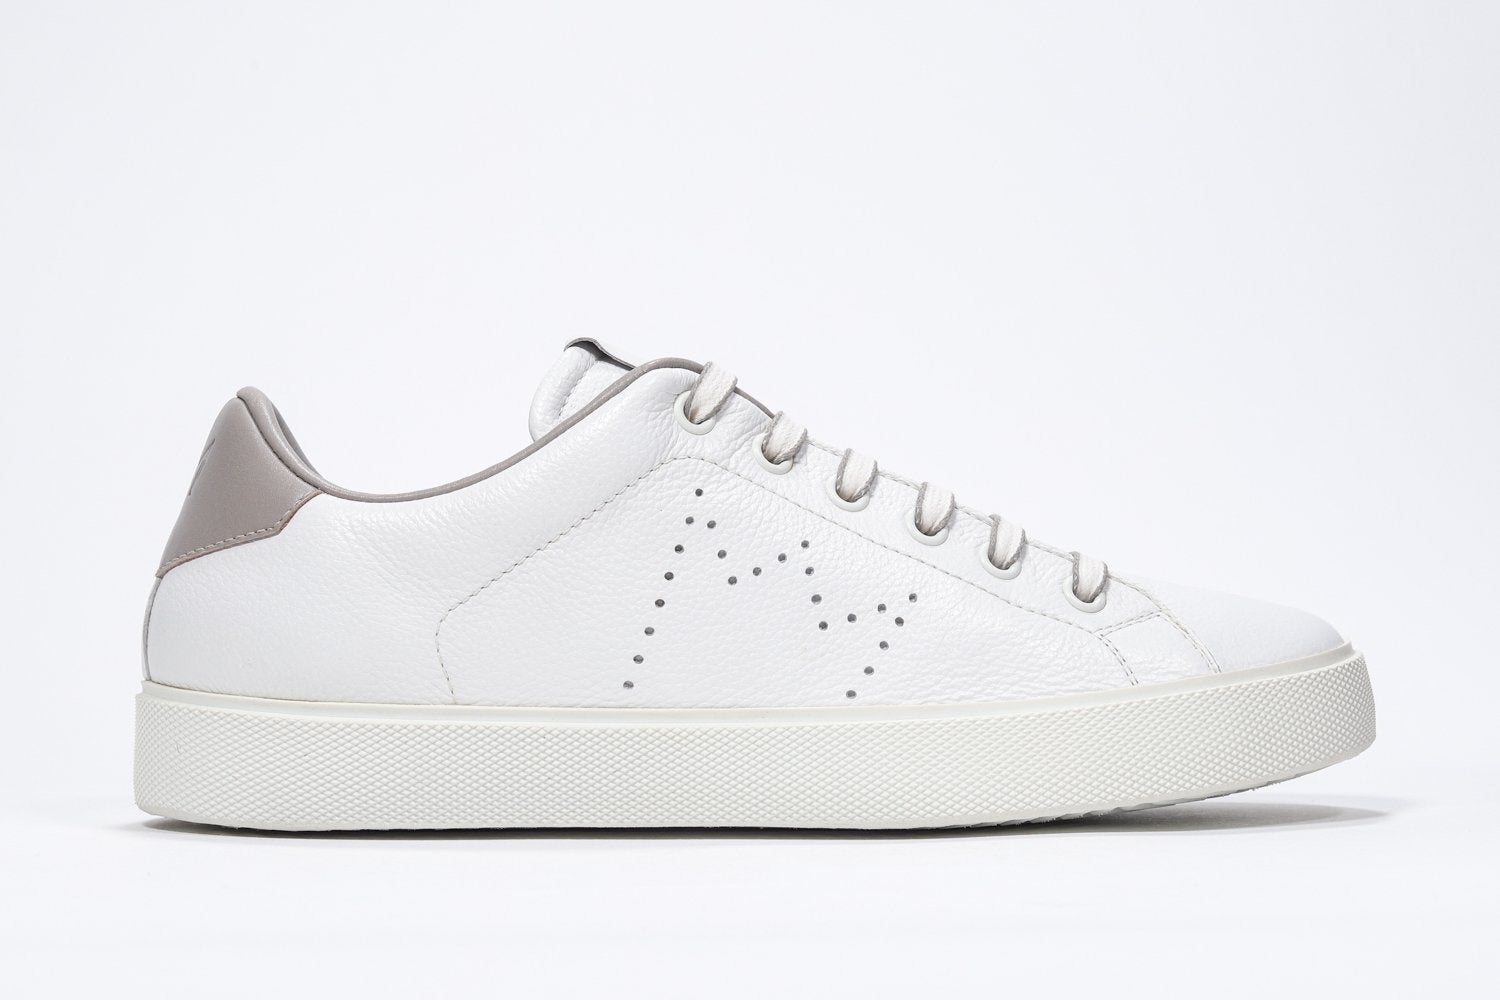 Side profile of low top white sneaker with beige detailing and perforated crown logo on upper. Full leather upper and white rubber sole.